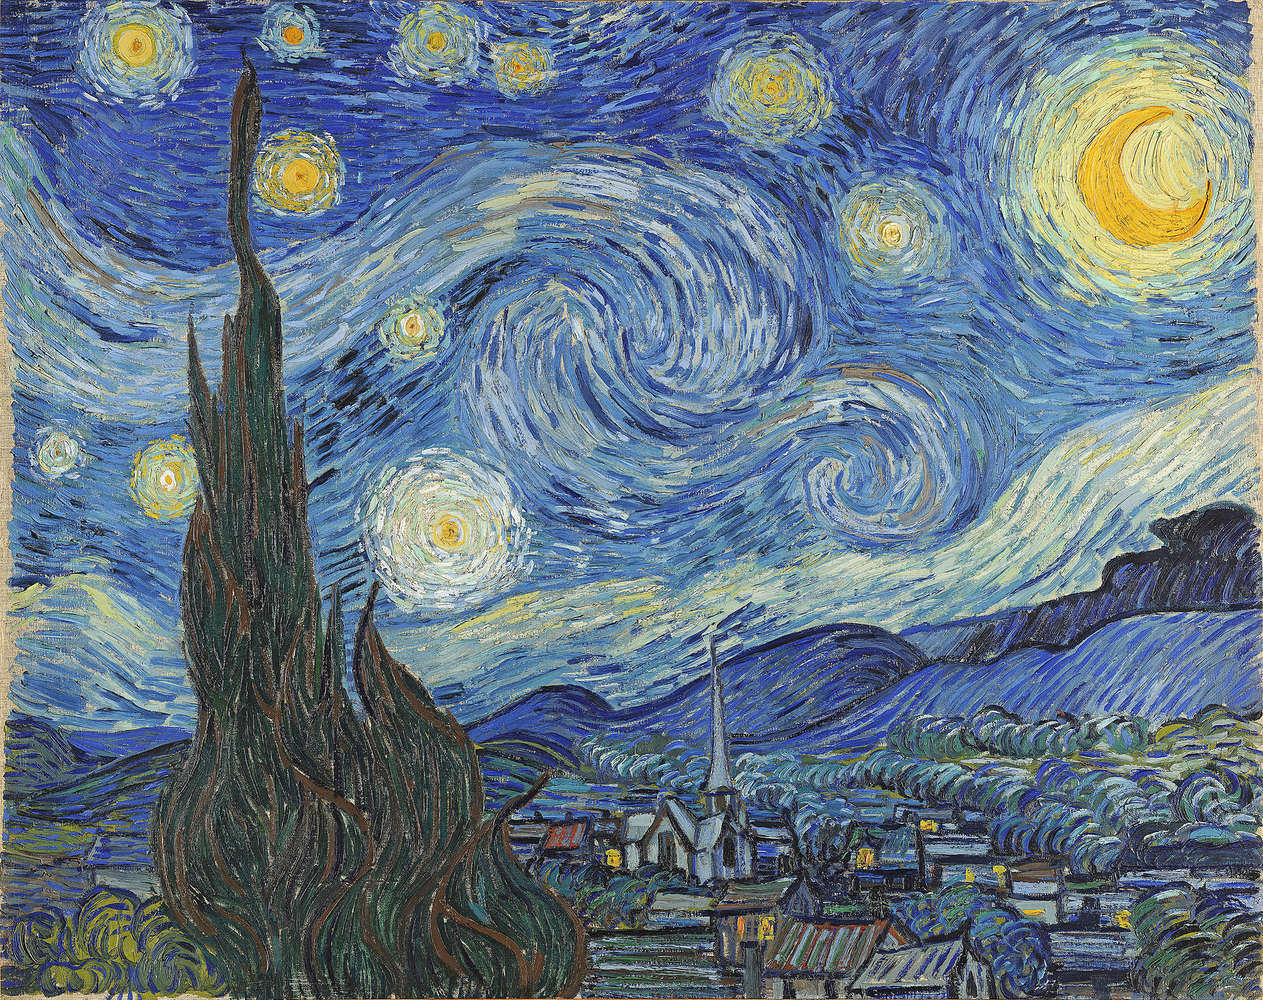             Photo wallpaper "The starry night" by Vincent van Gogh
        